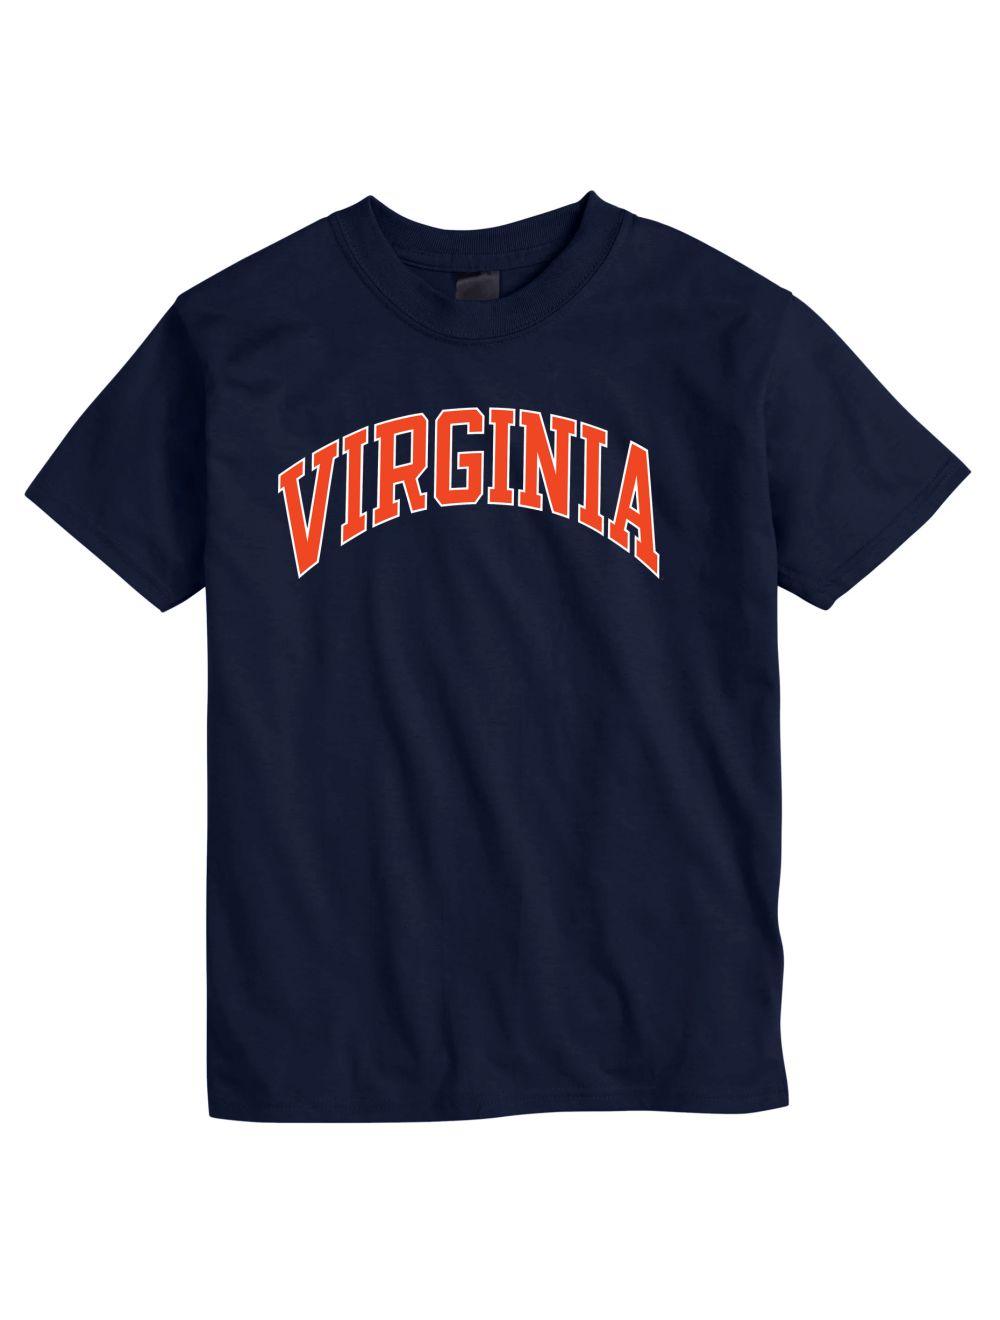 Youth Pennant Bear T-Shirt - Mincer's of Charlottesville